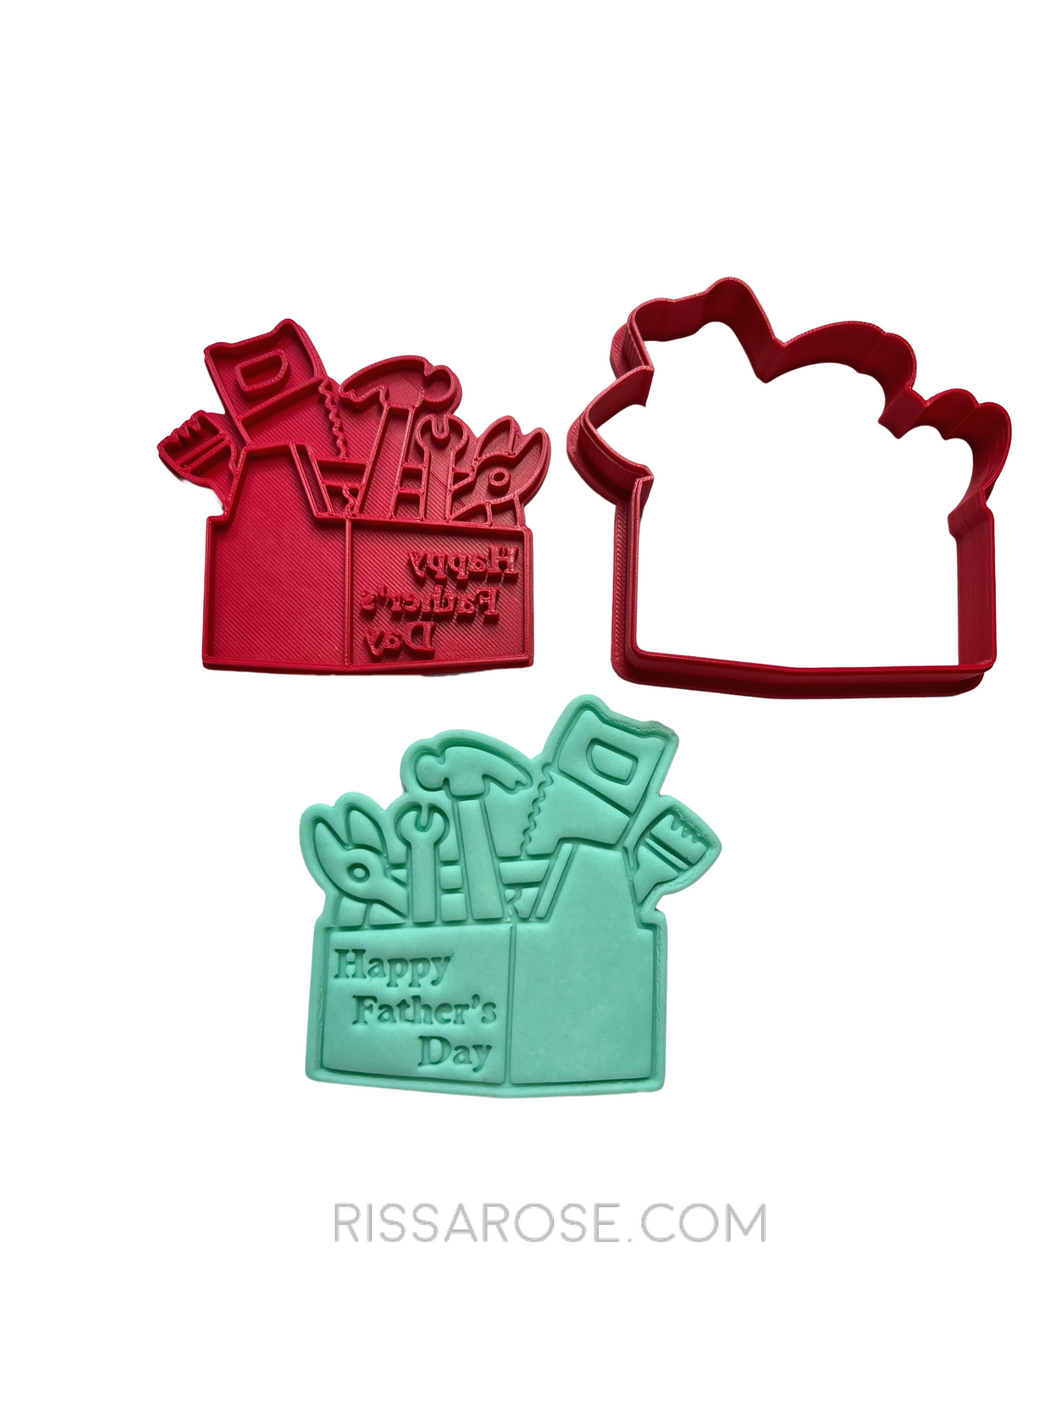 tool box cookie cutter and embosser - happy father's day with message